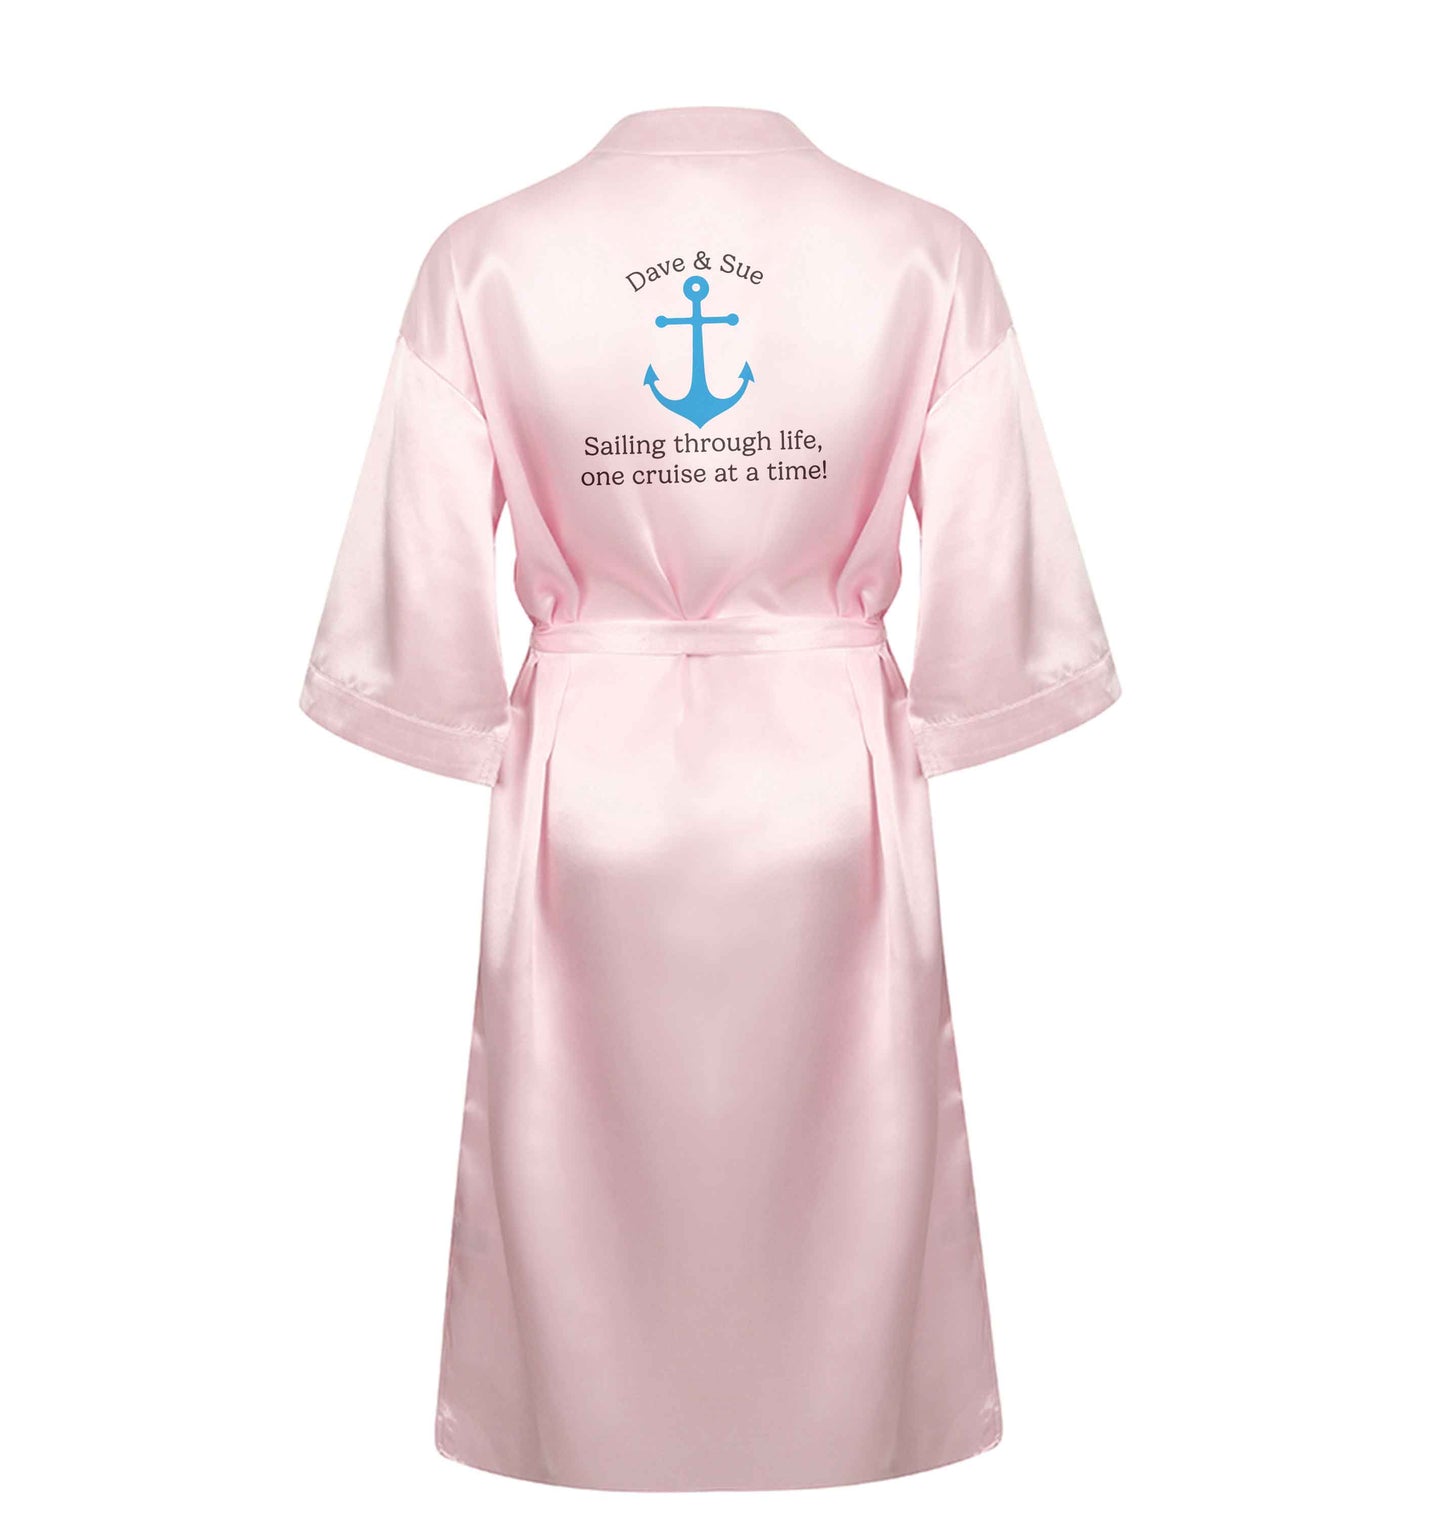 Sailing through life one cruise at a time - personalised XL/XXL pink ladies dressing gown size 16/18